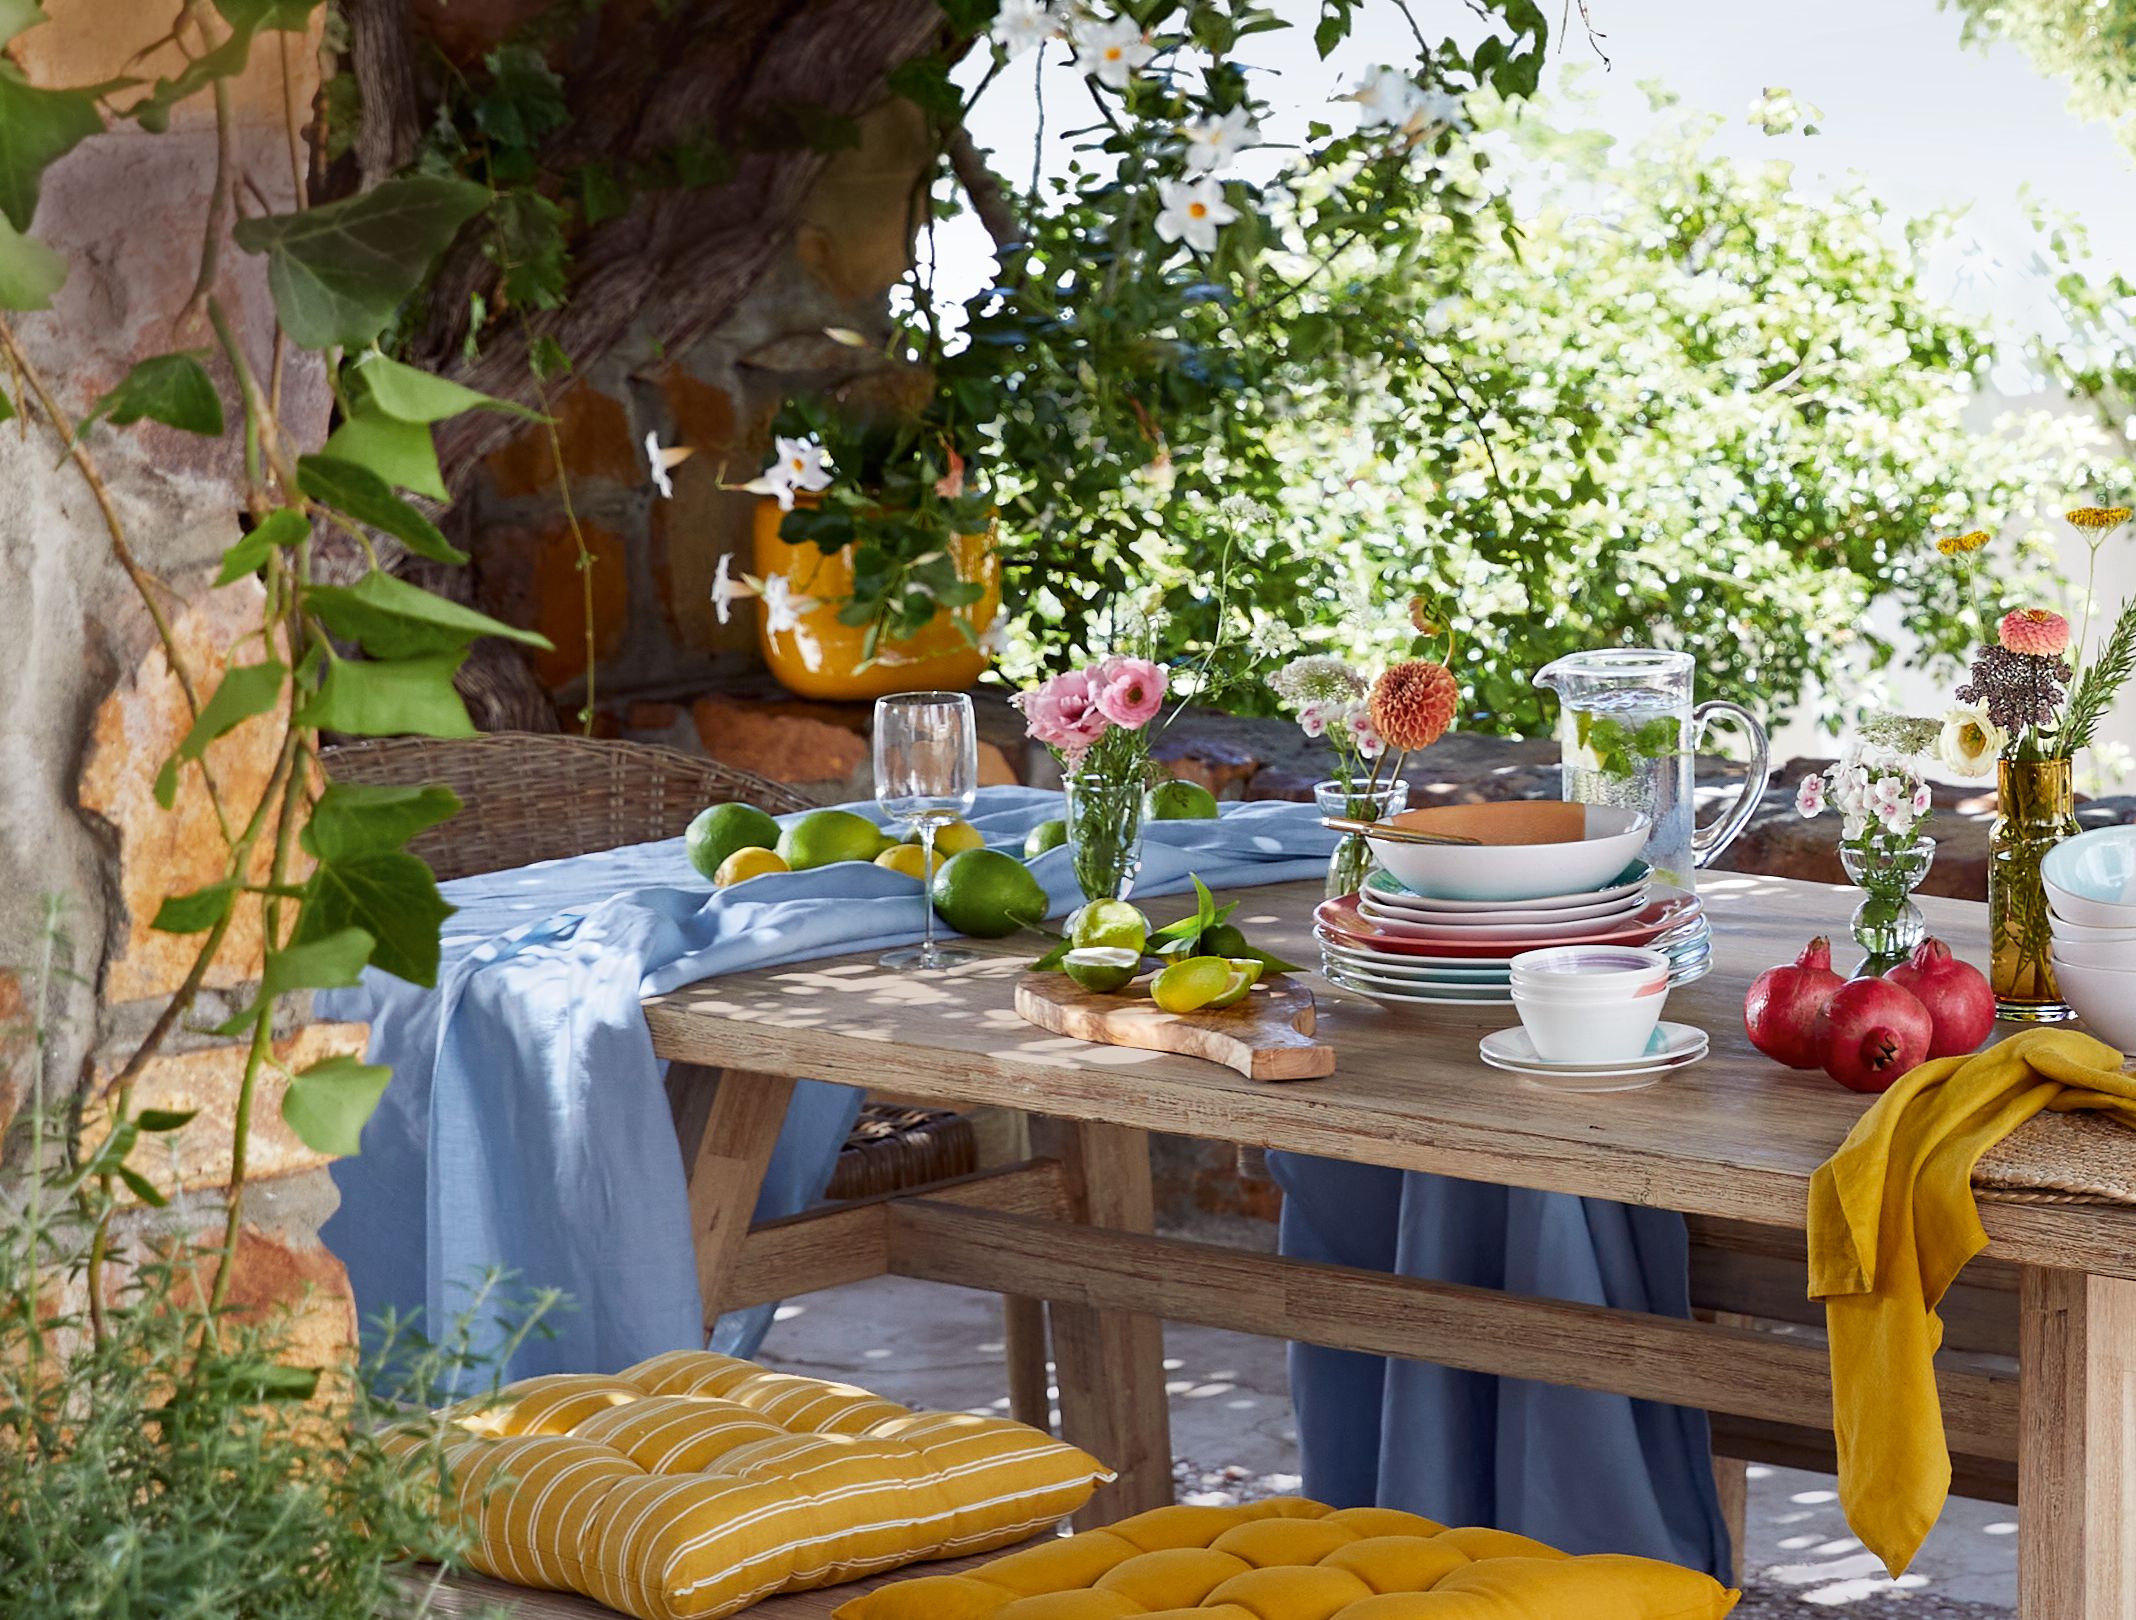 Create a stylish outdoor table for garden gatherings